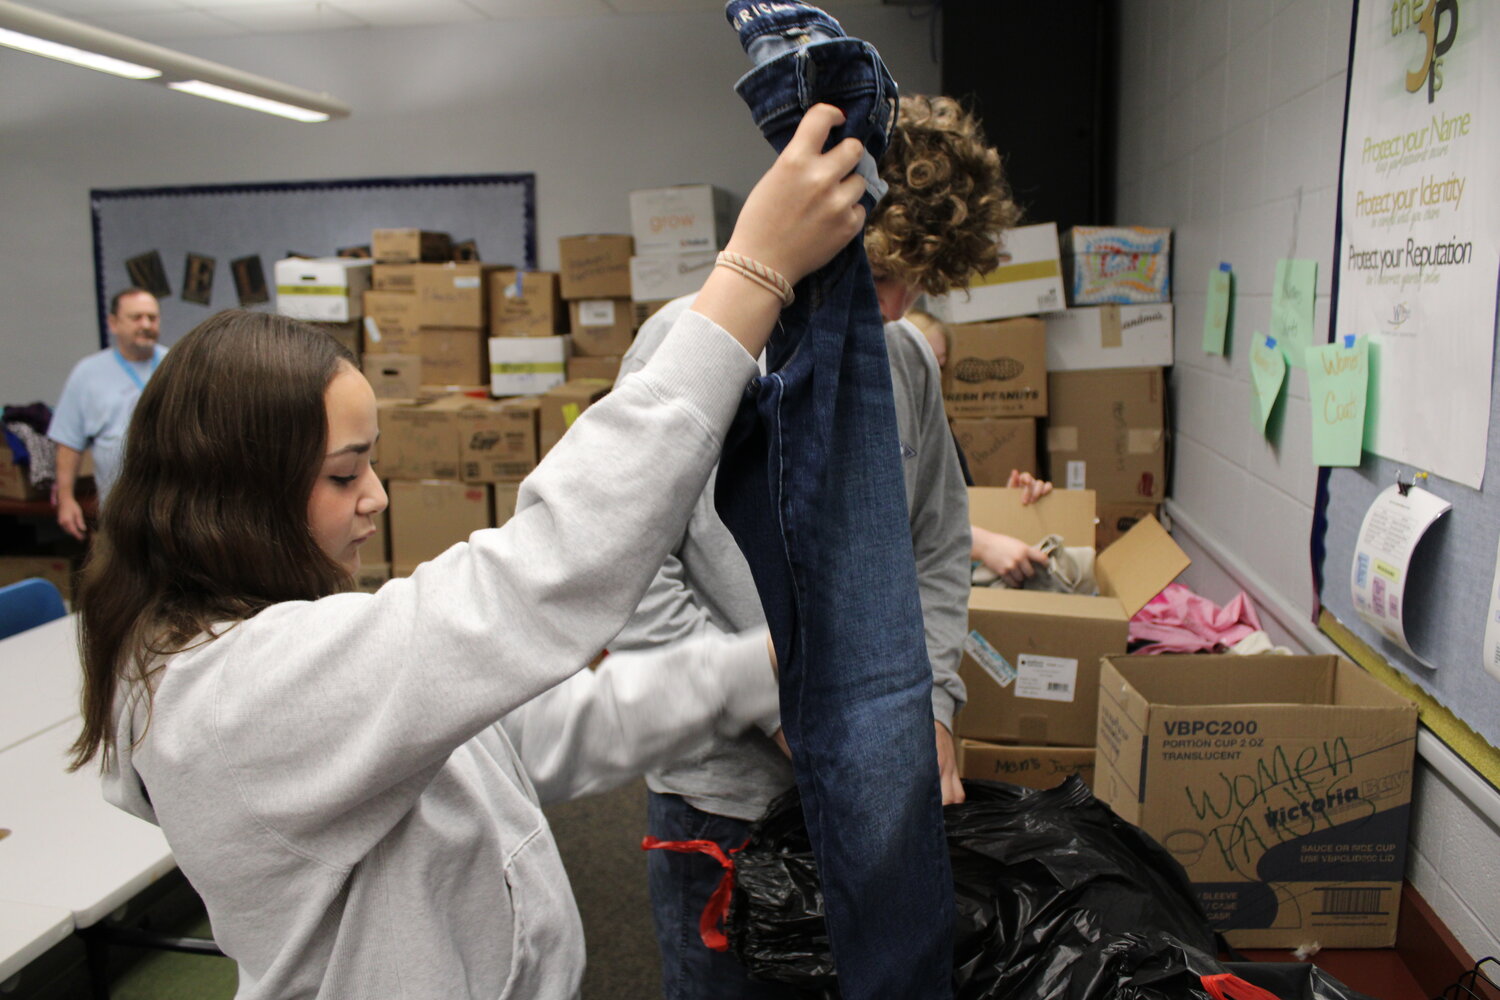 McKenzie Fry inspects a pair of jeans donated to help homeless veterans.